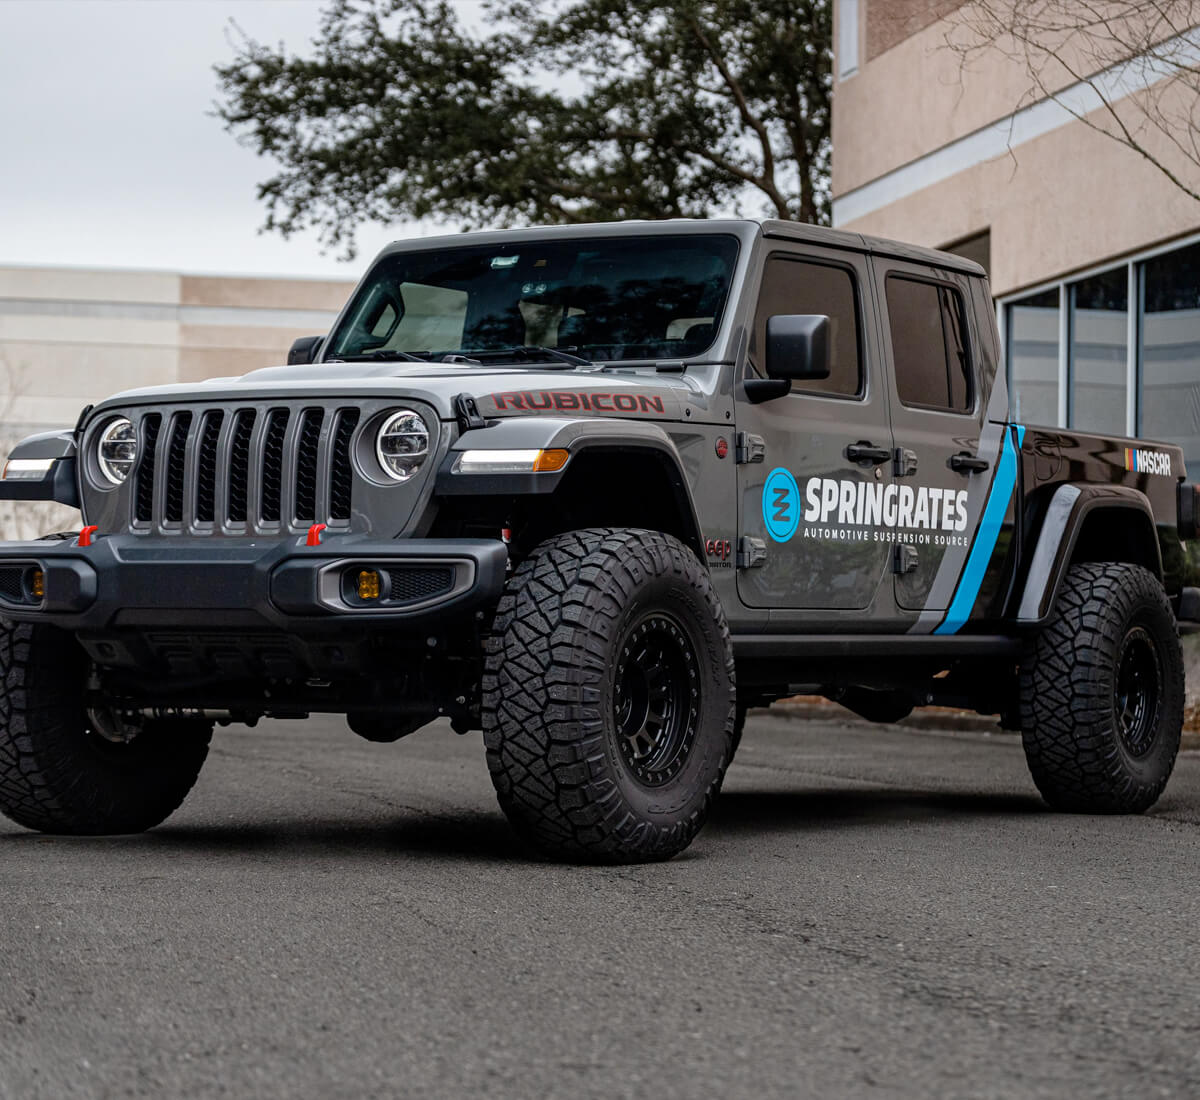 Grey Jeep Rubicon with advertisement of business